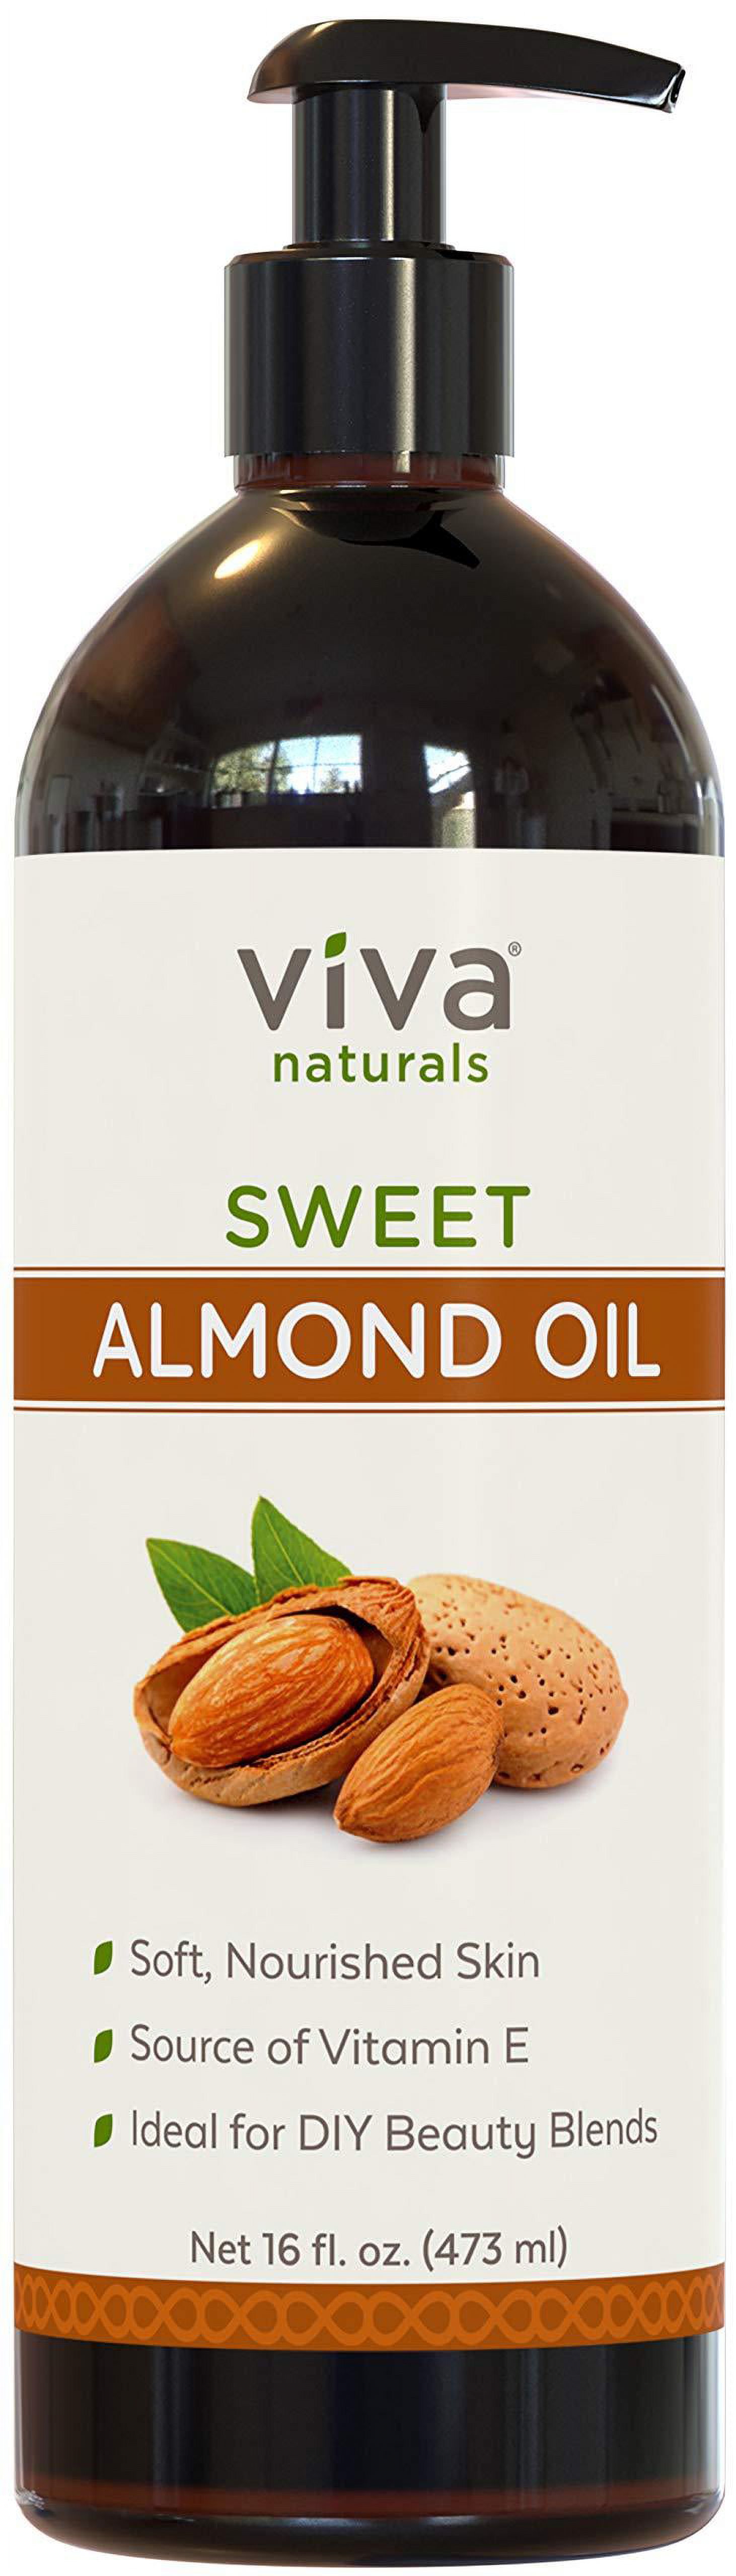 Almond Oil (16 oz); Sweet Almond Oil for Skin or Almond Oil for Hair, The Perfect Natural Body Oil for Women, Great as Unscented Massage Oil - image 2 of 5